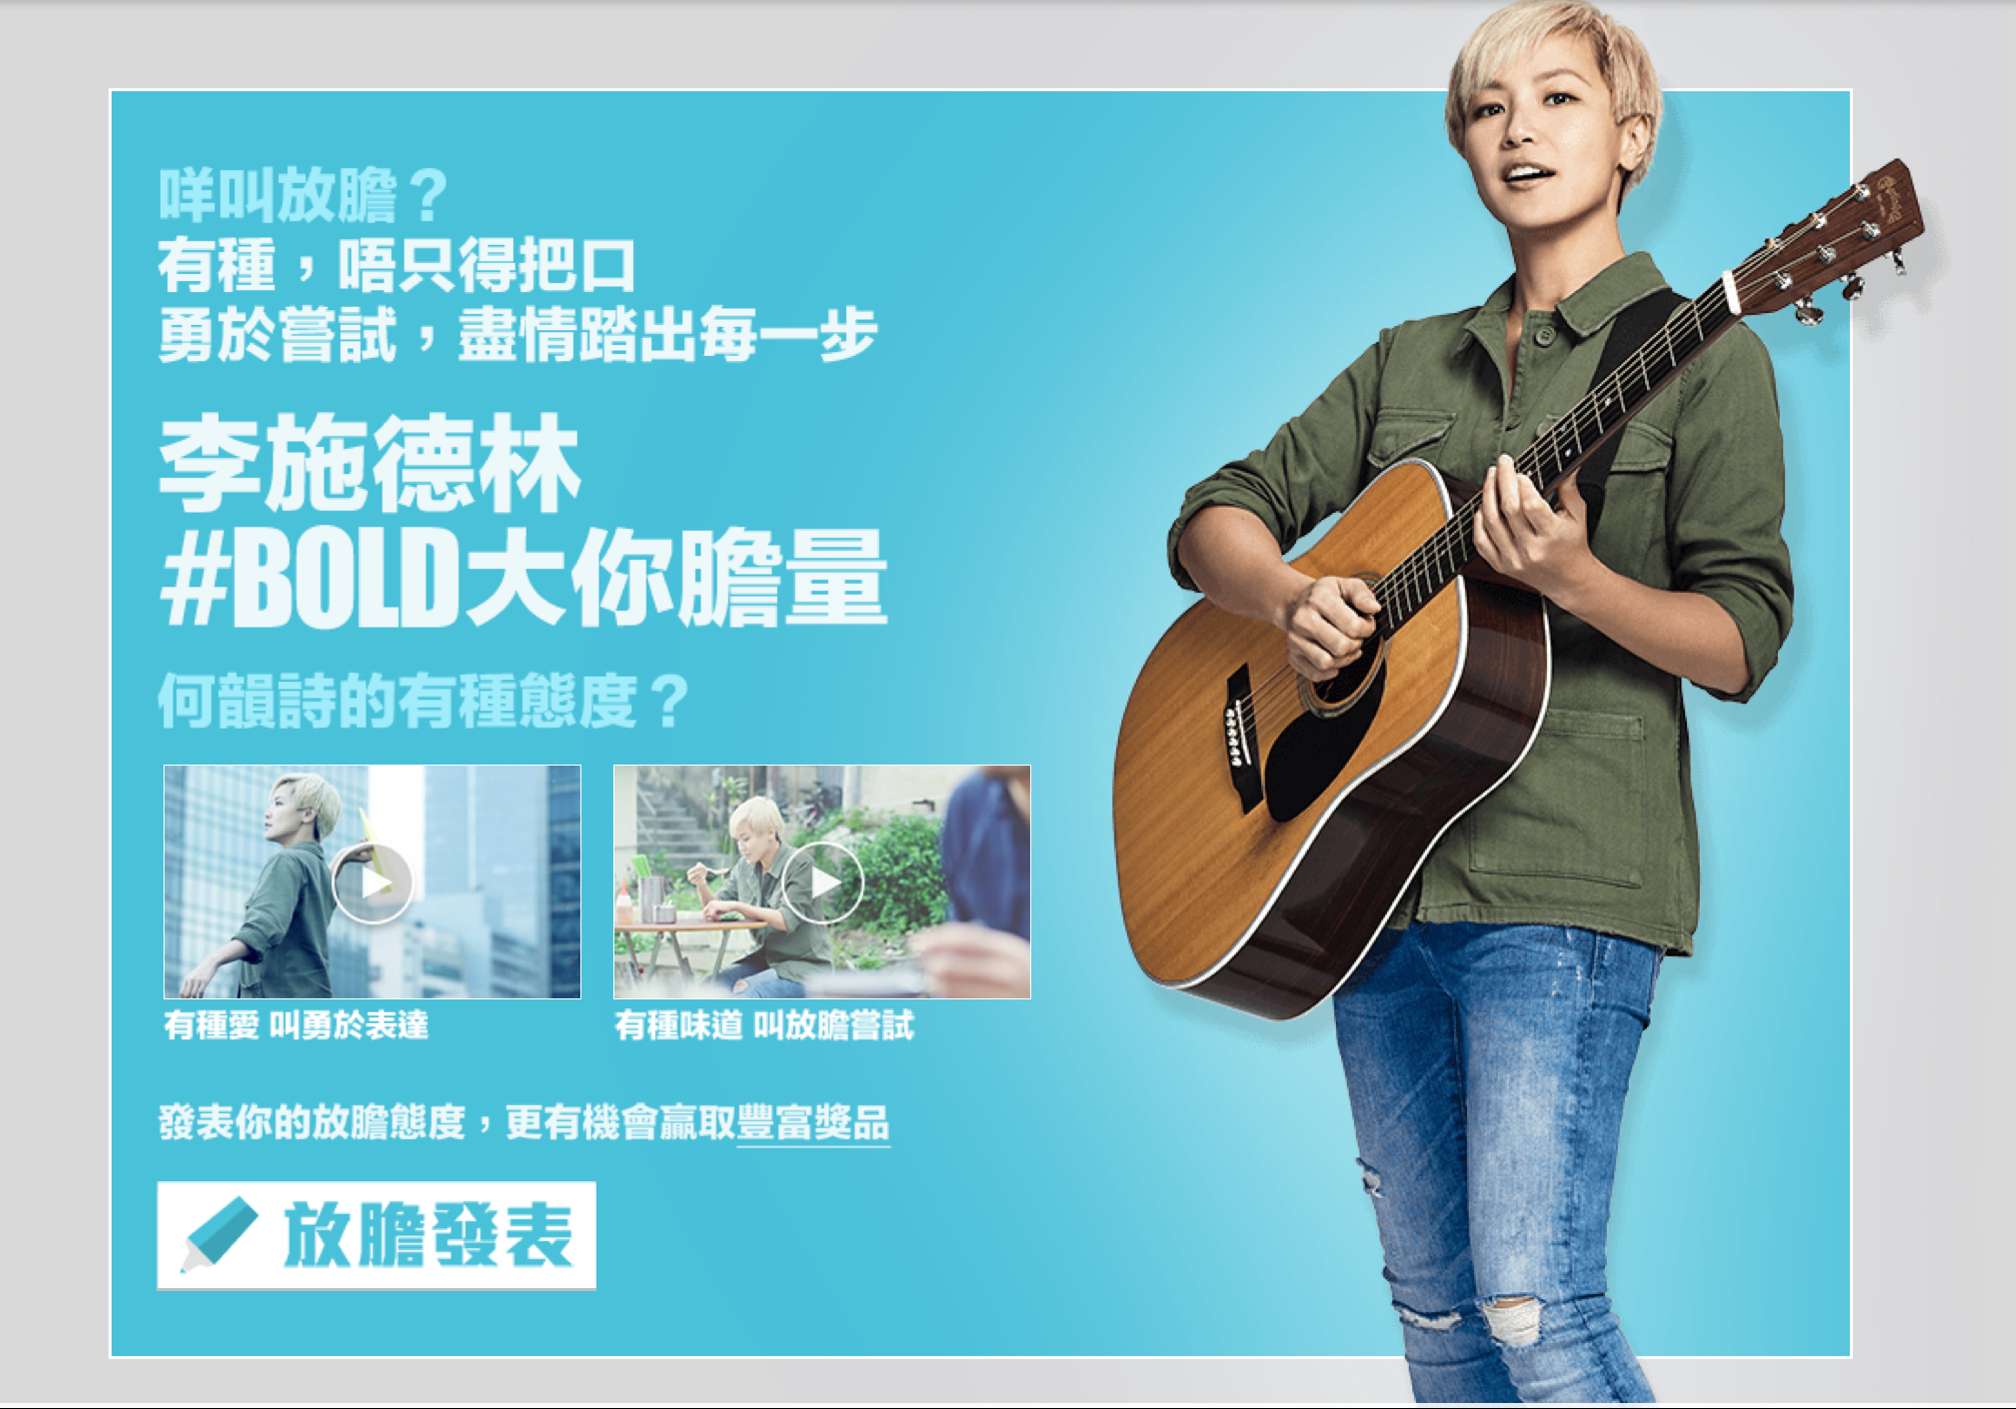 Listerine Hong Kong’s spokeswoman confirmed that material featuring Denise Ho would be taken down.